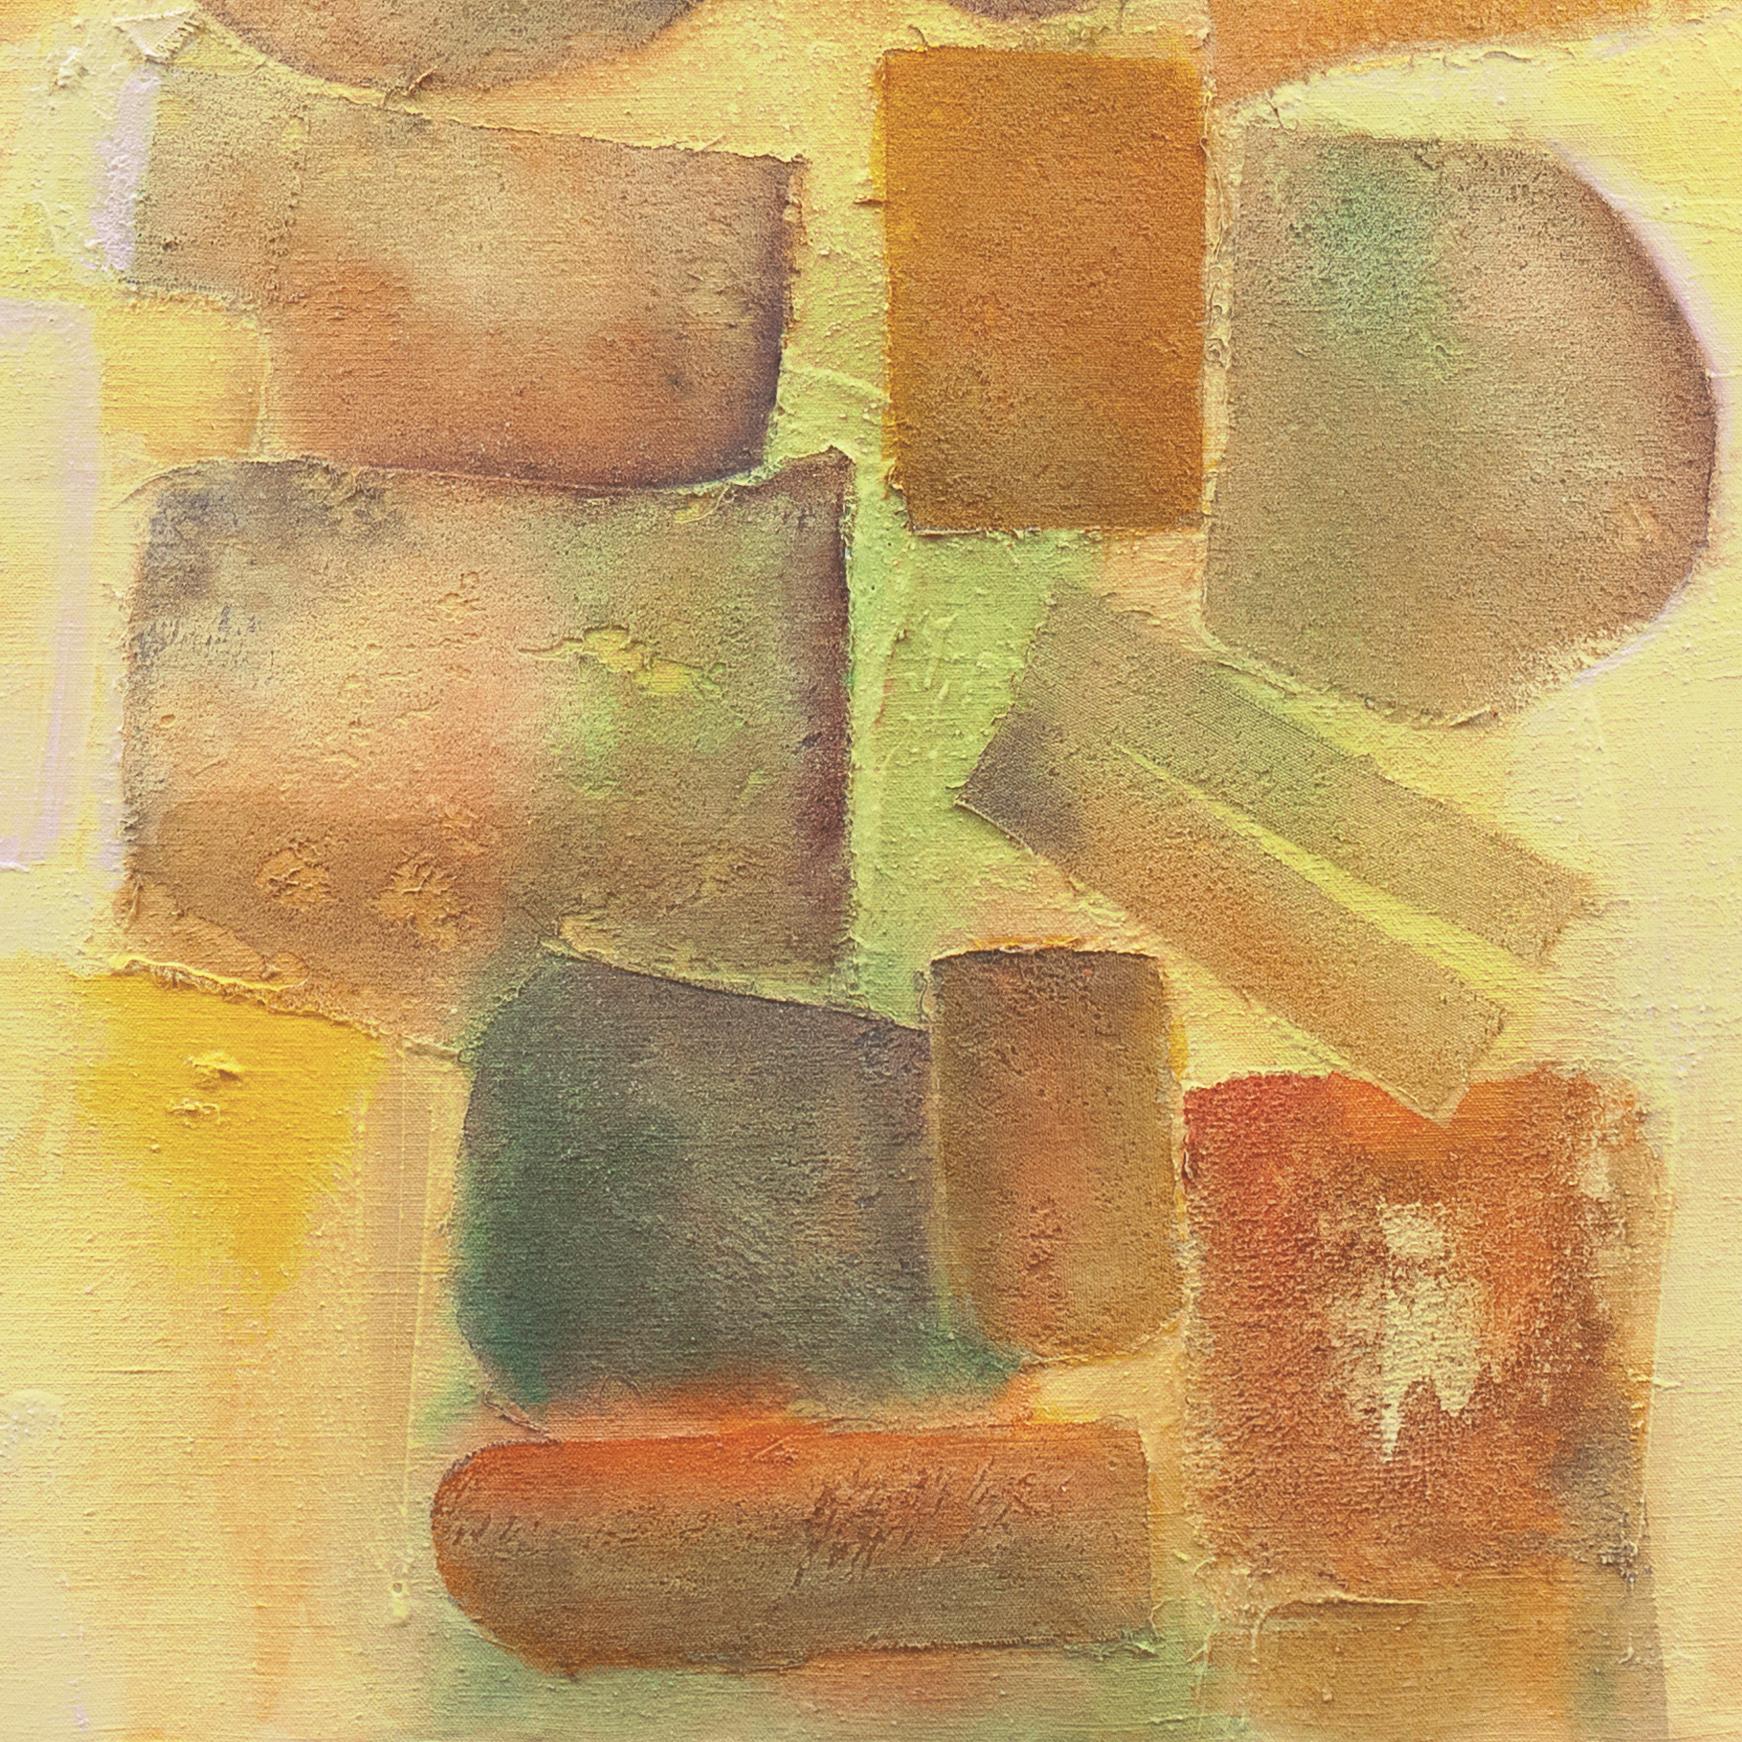 'Construction in Saffron and Tourmaline', French Geometric Abstract, Los Robles 2